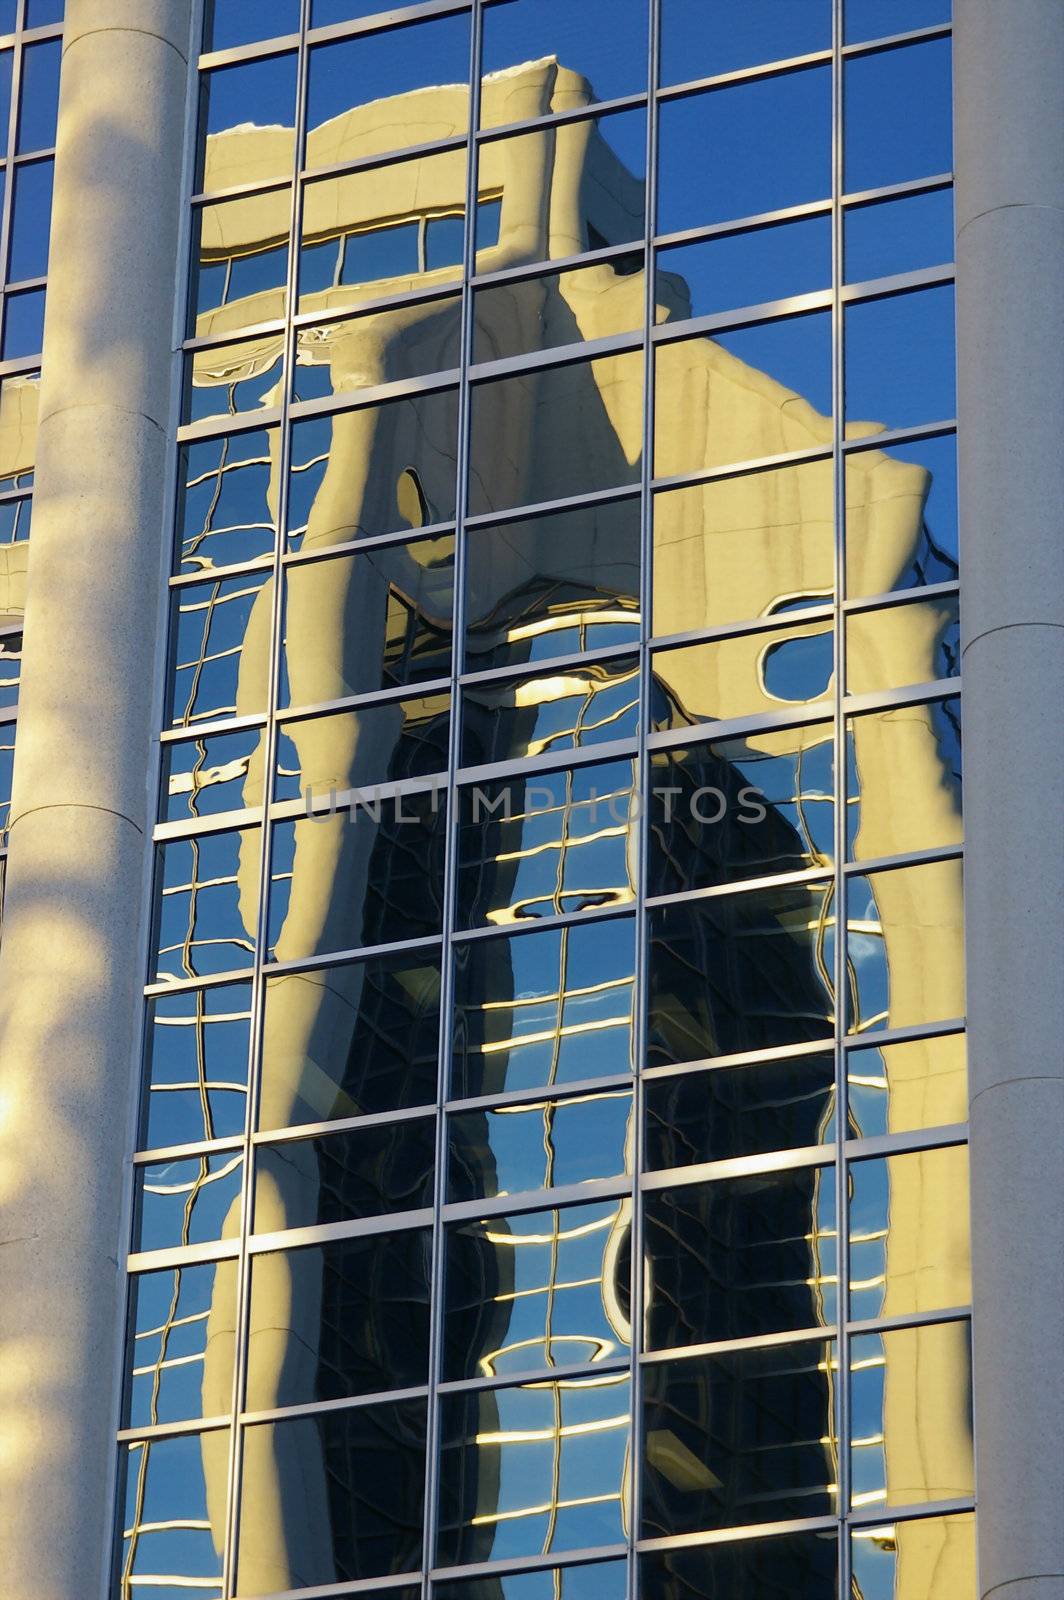 A concert and glass building reflected in another concert and glass building.